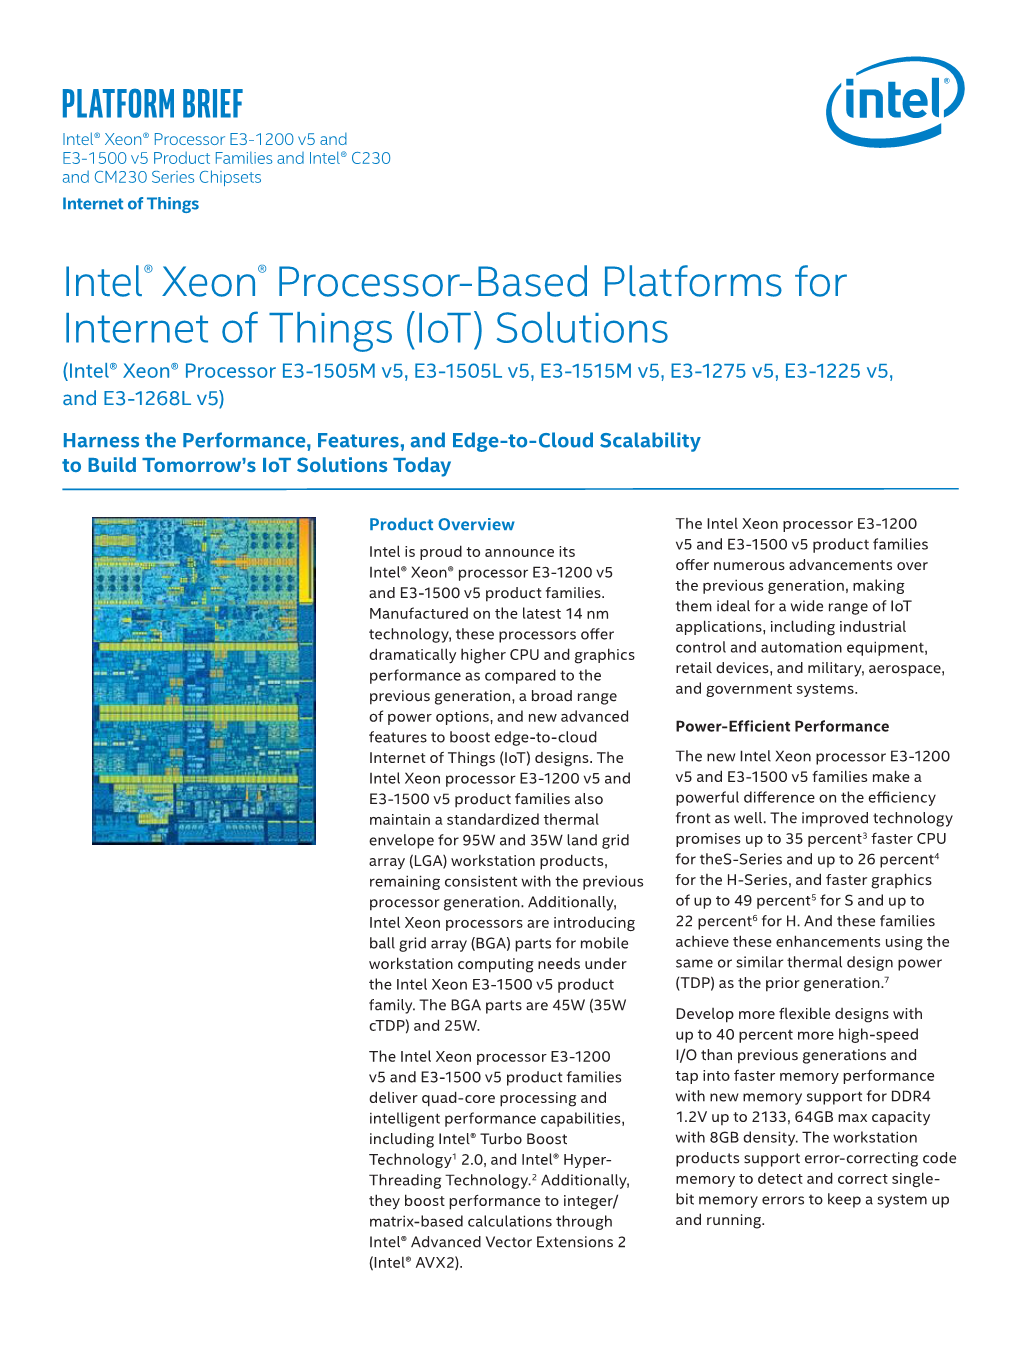 Intel® Xeon® Processor-Based Platforms for Internet of Things (Iot